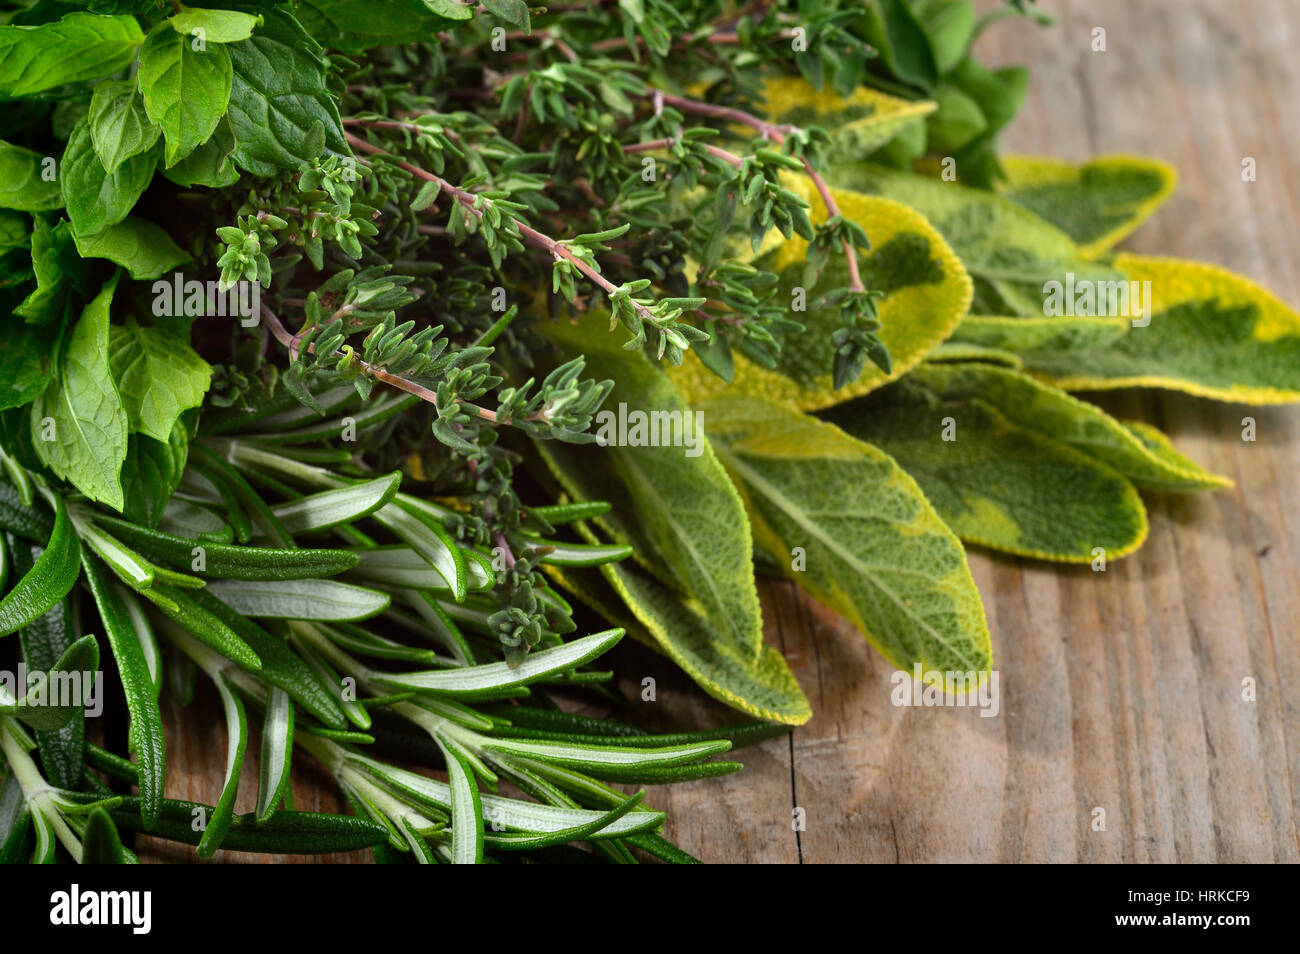 Freshly harvested herbs: rosemary, mint, sage and thyme over wooden background. Angle view. Stock Photo